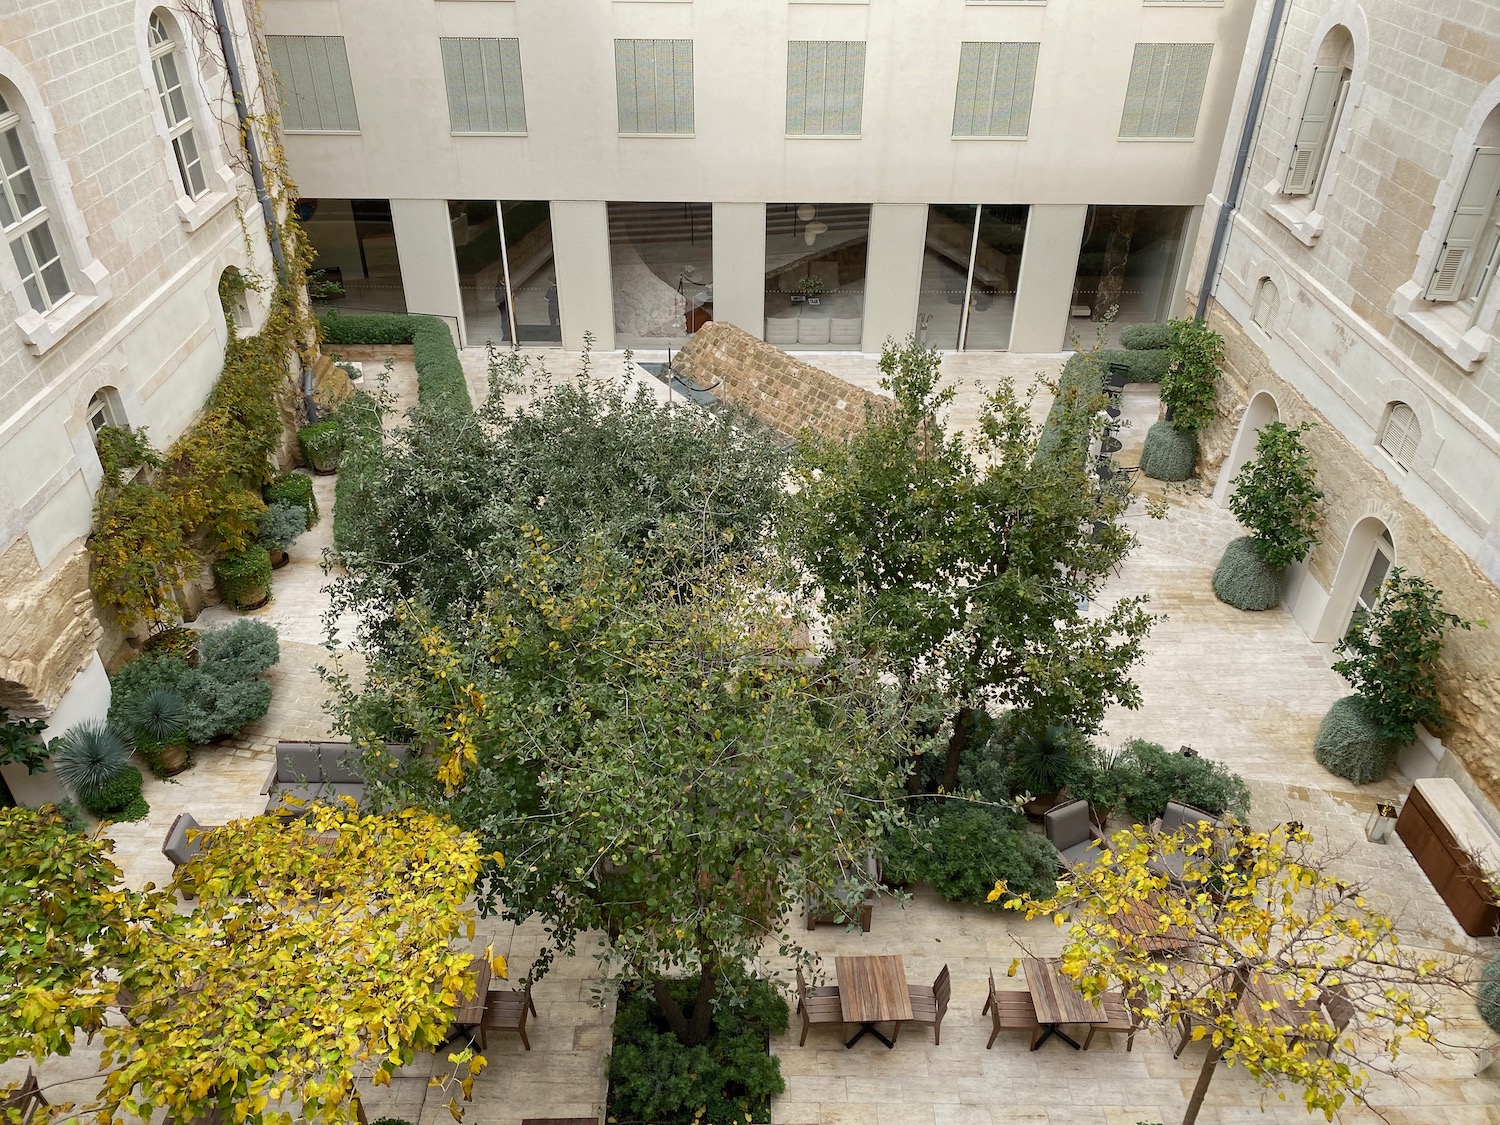 a courtyard with trees and chairs